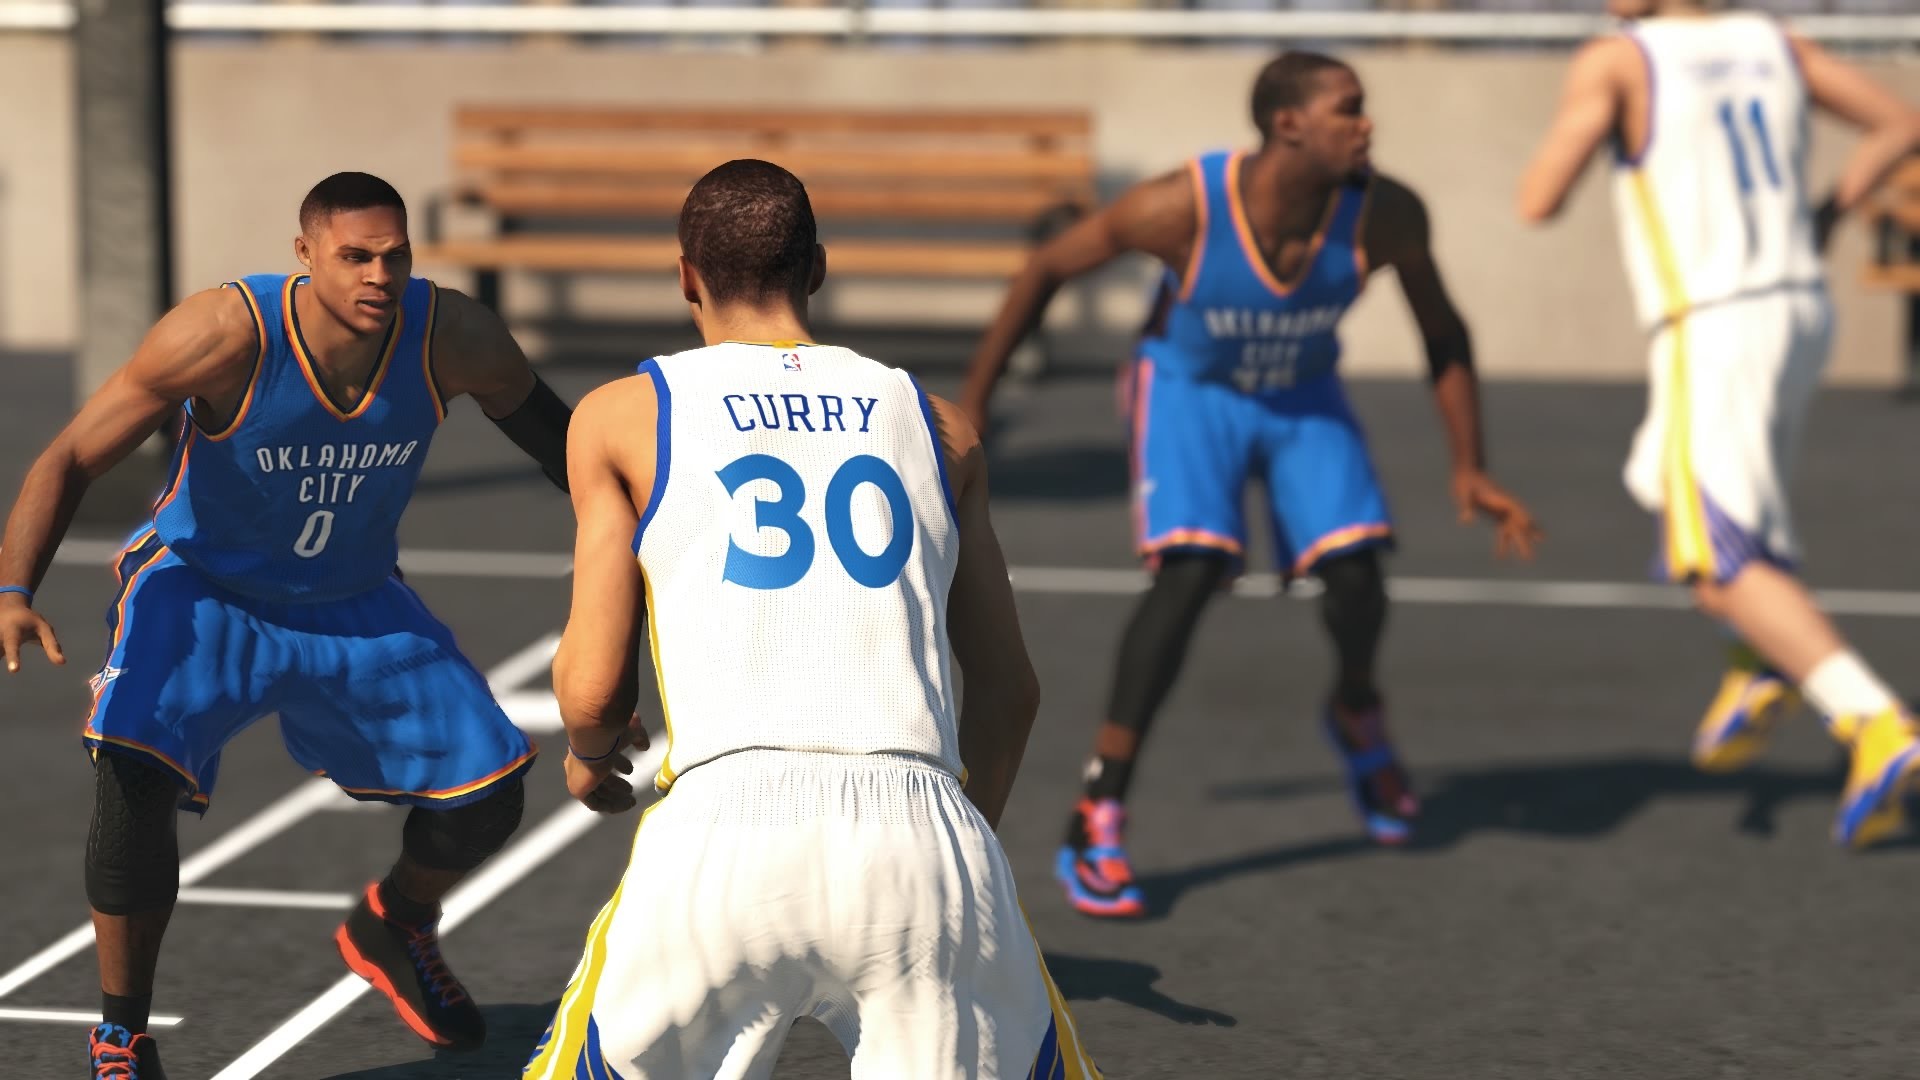 Nba 2k - Kevin Durant Russell Westbrook Steph Curry - HD Wallpaper 